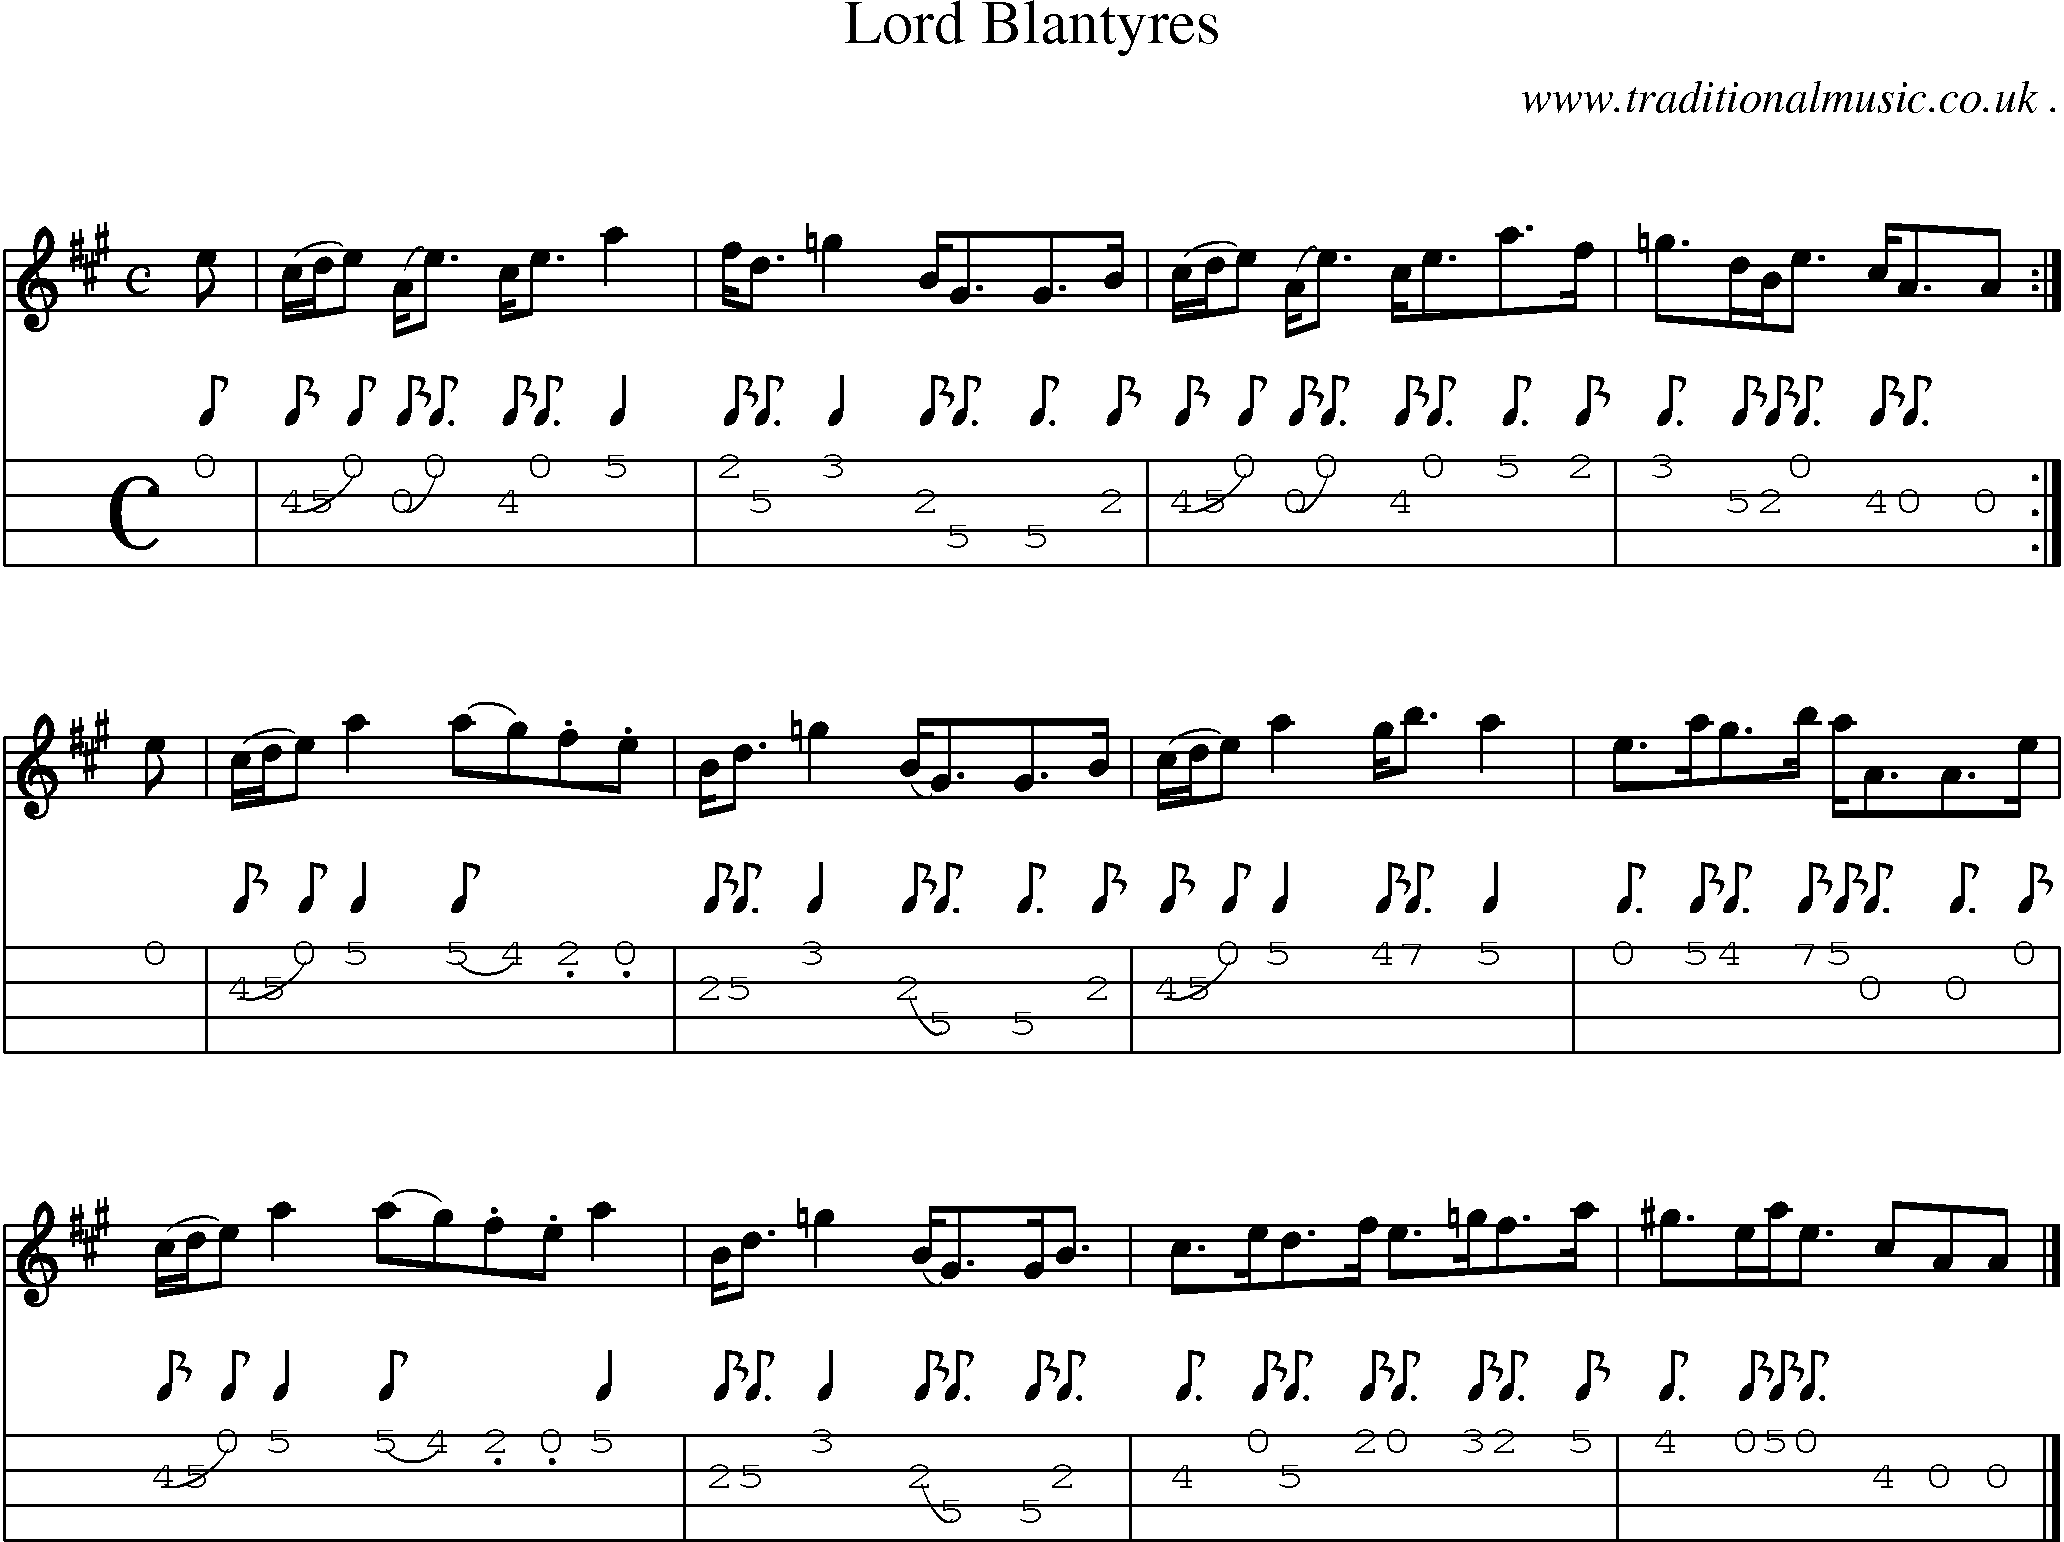 Sheet-music  score, Chords and Mandolin Tabs for Lord Blantyres